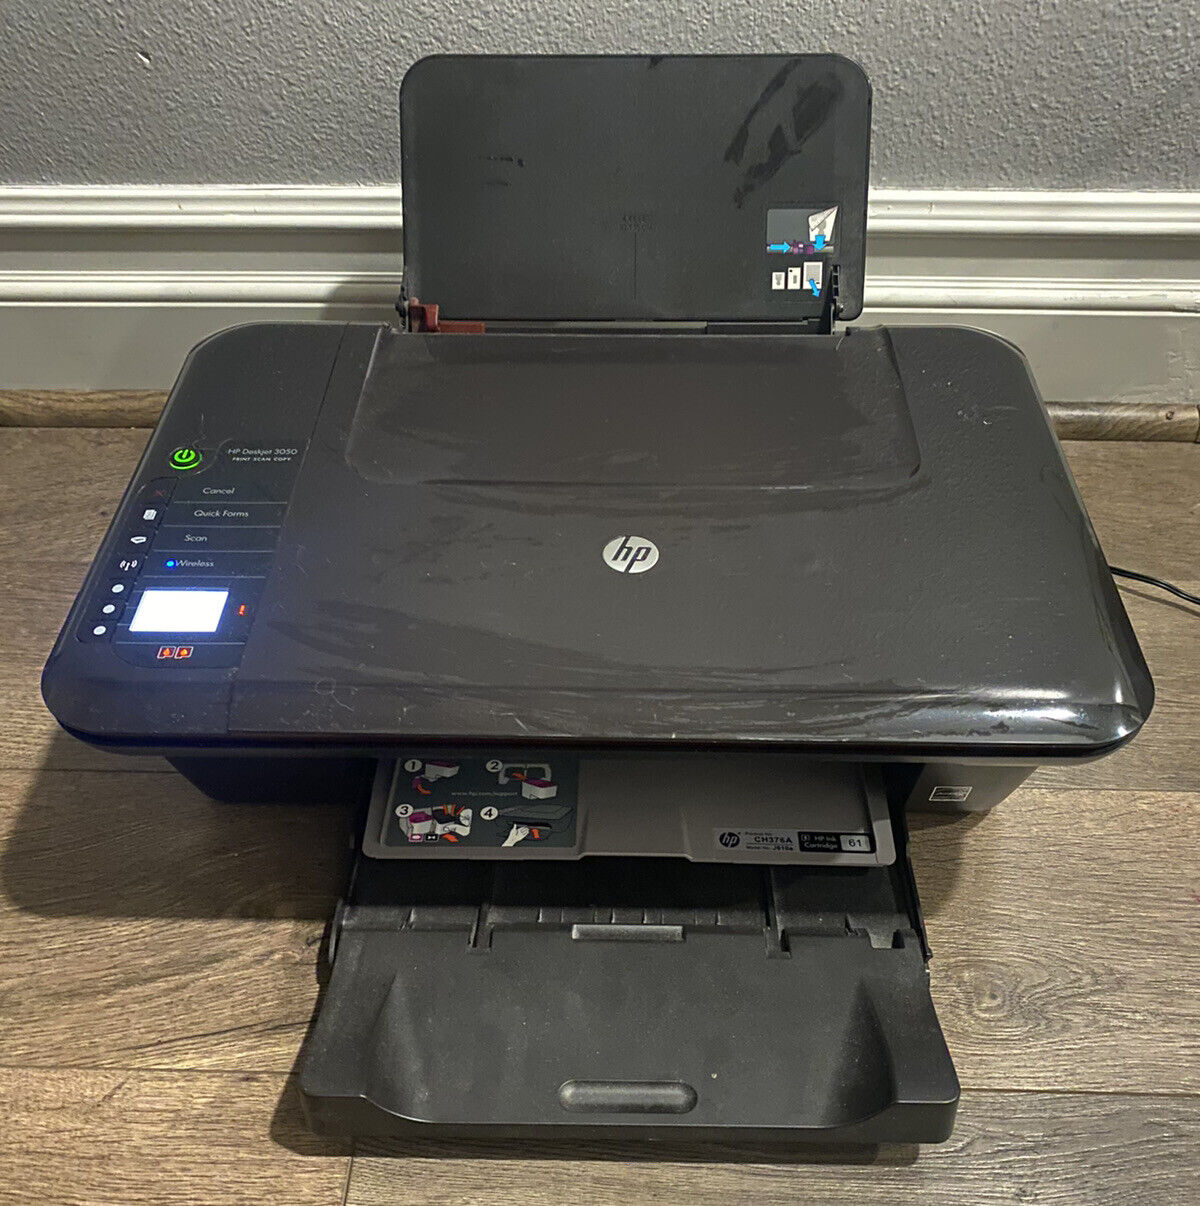 how-to-connect-hp-deskjet-3050-to-wireless-network-without-cd